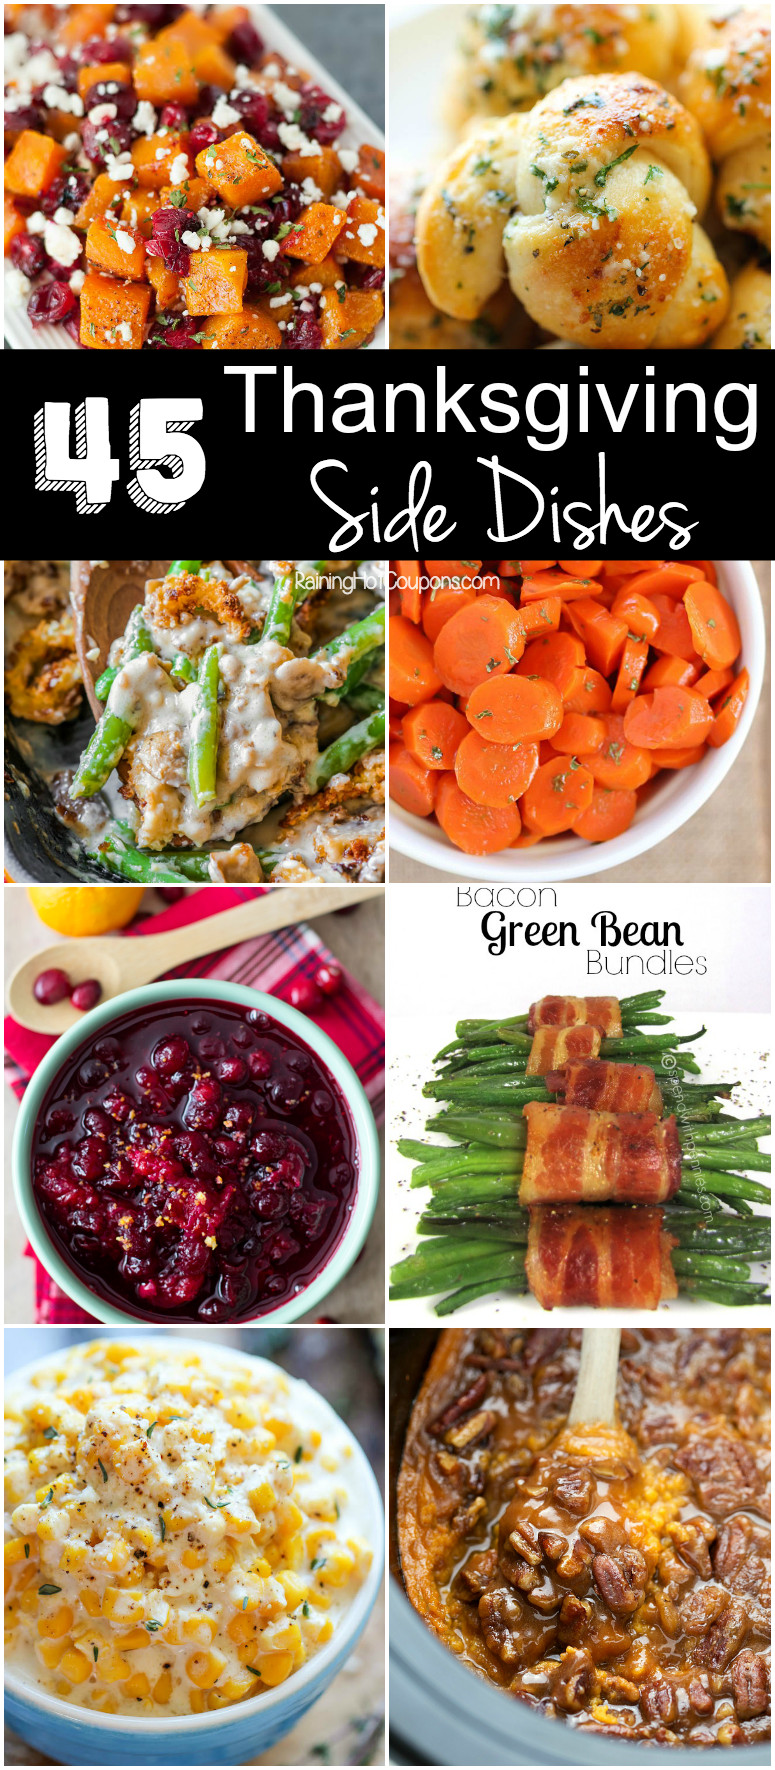 Thanksgiving Food Dishes
 45 Thanksgiving Side Dishes